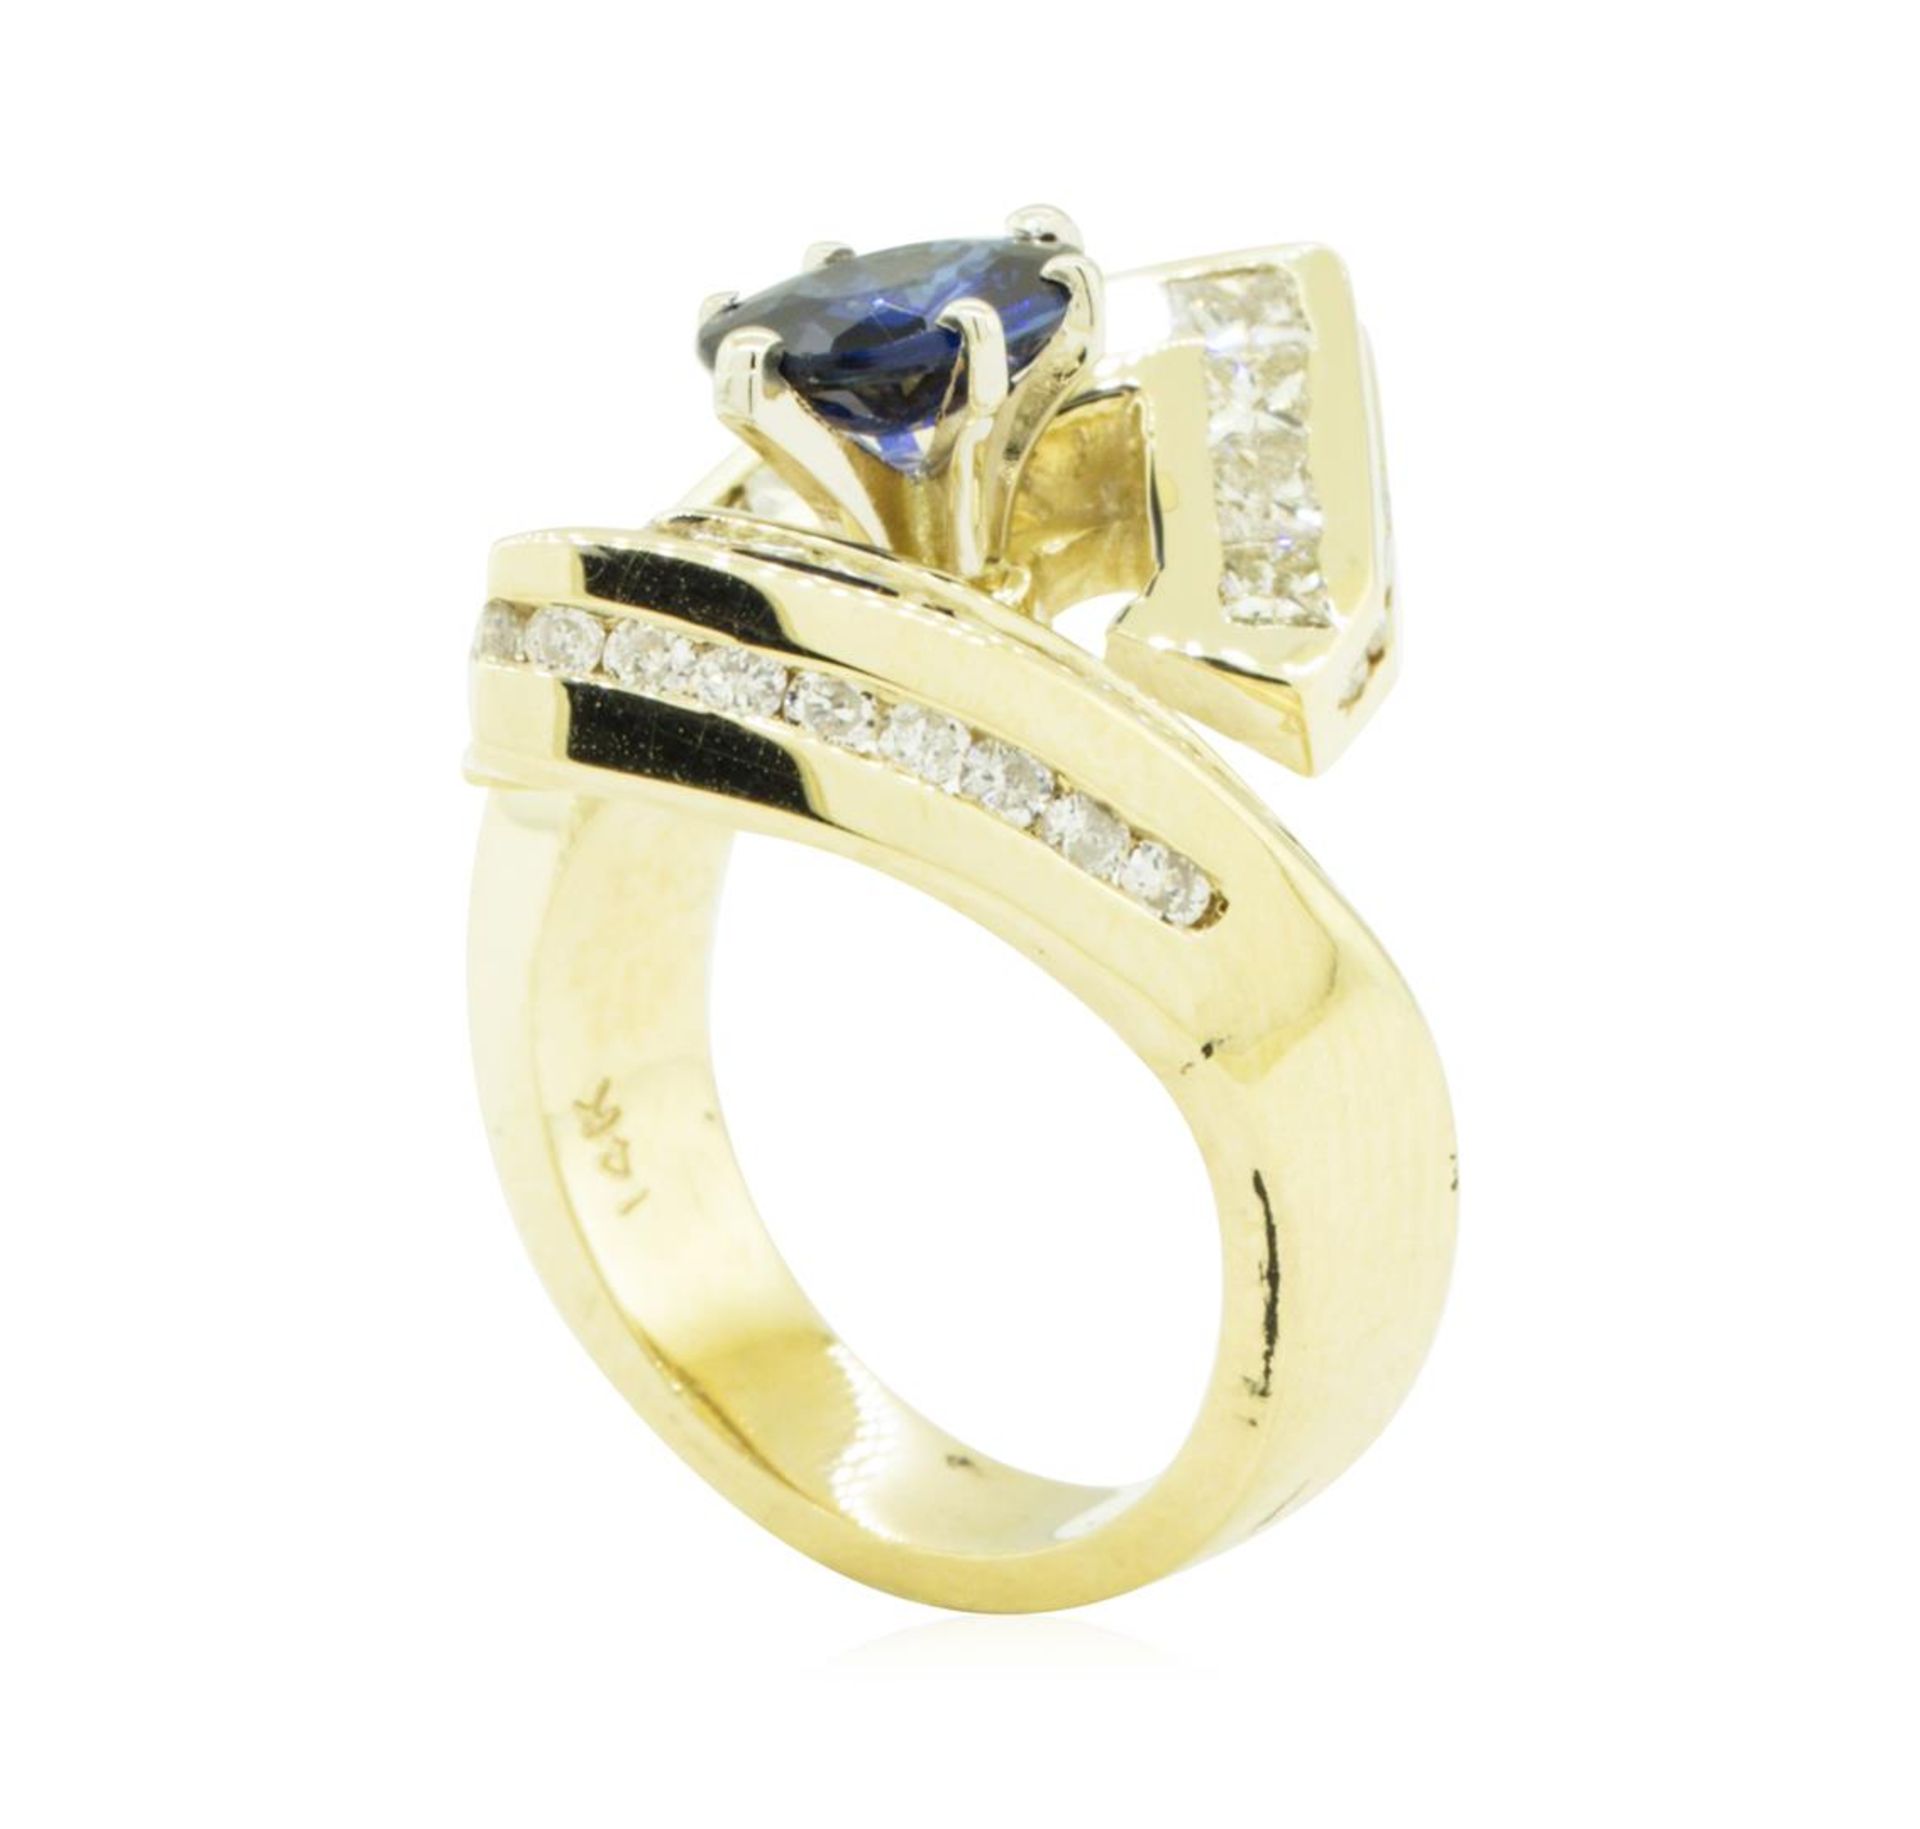 3.16 ctw Oval Brilliant Blue Sapphire And Diamond Ring - 14KT Yellow Gold - Image 4 of 5